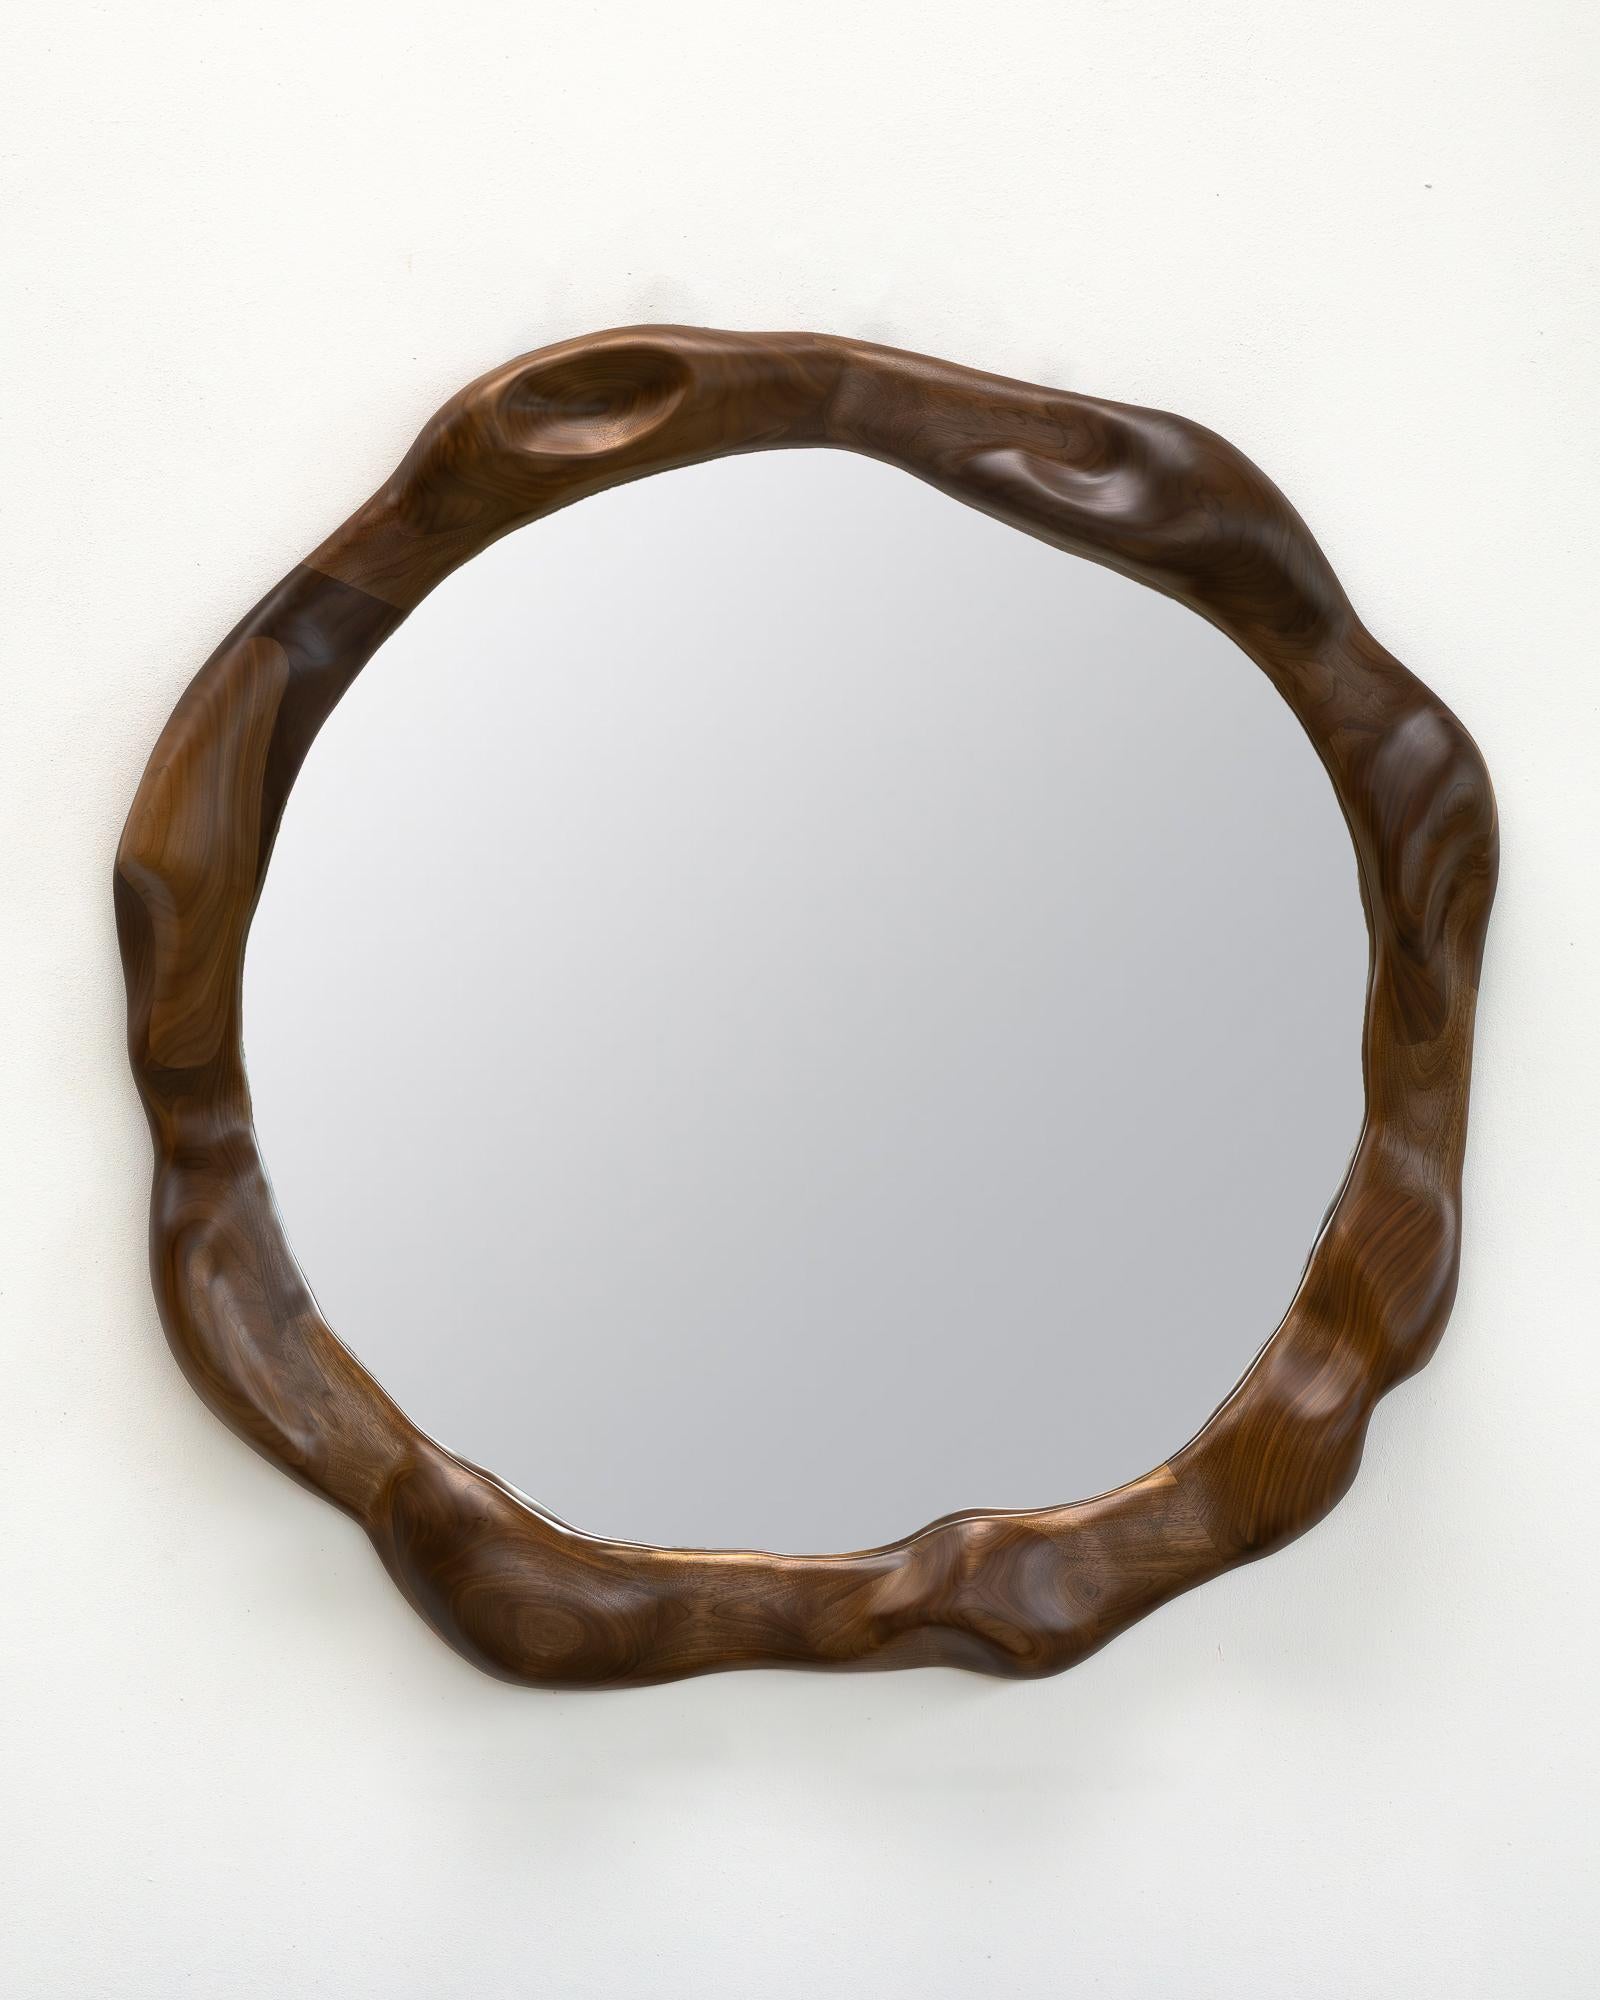 The frame of the mirror is shaped using various hand tools, making each piece unique with its own distinctive wood grain. It is made from high-quality walnut wood and finished with a hardwax oil. 

The mirror is mounted on the wall by hanging it on